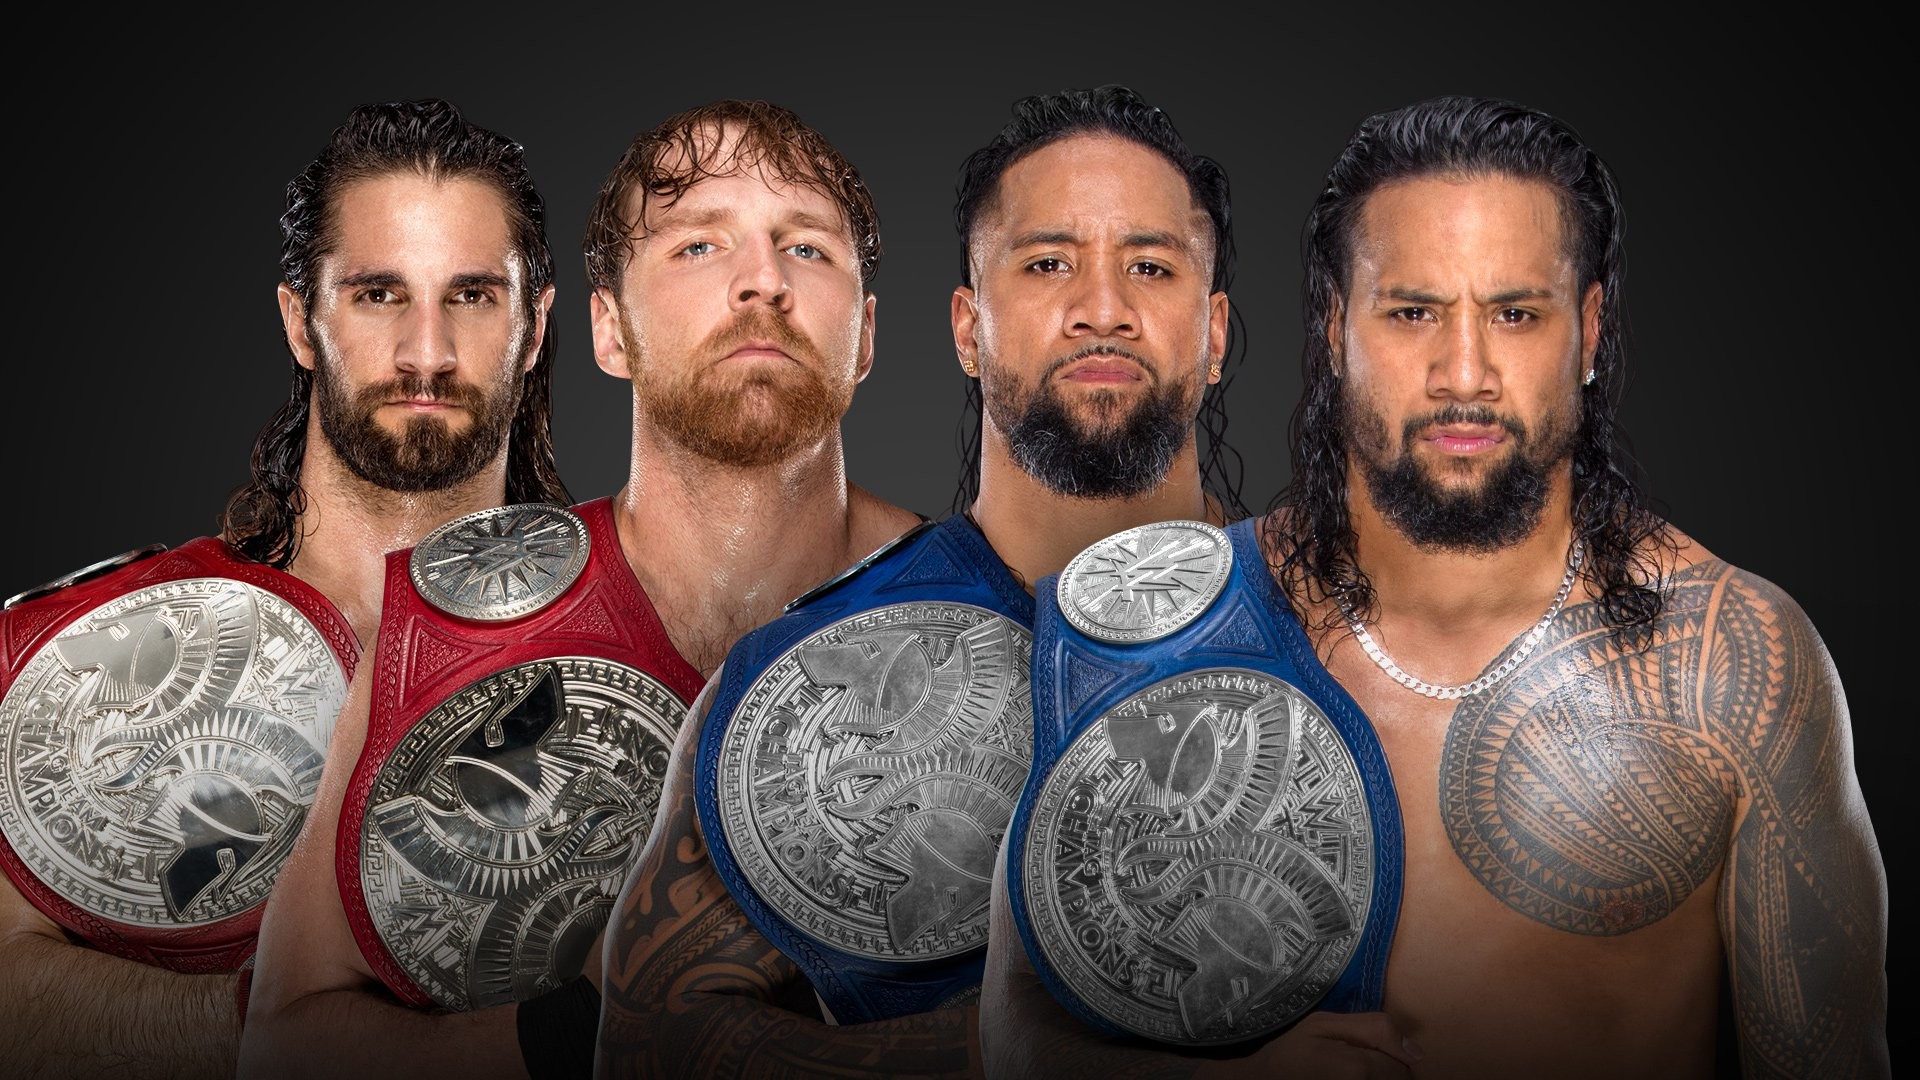 1920x1080, Which Brand Has The Better Tag Team Champions - HD Wallpaper 